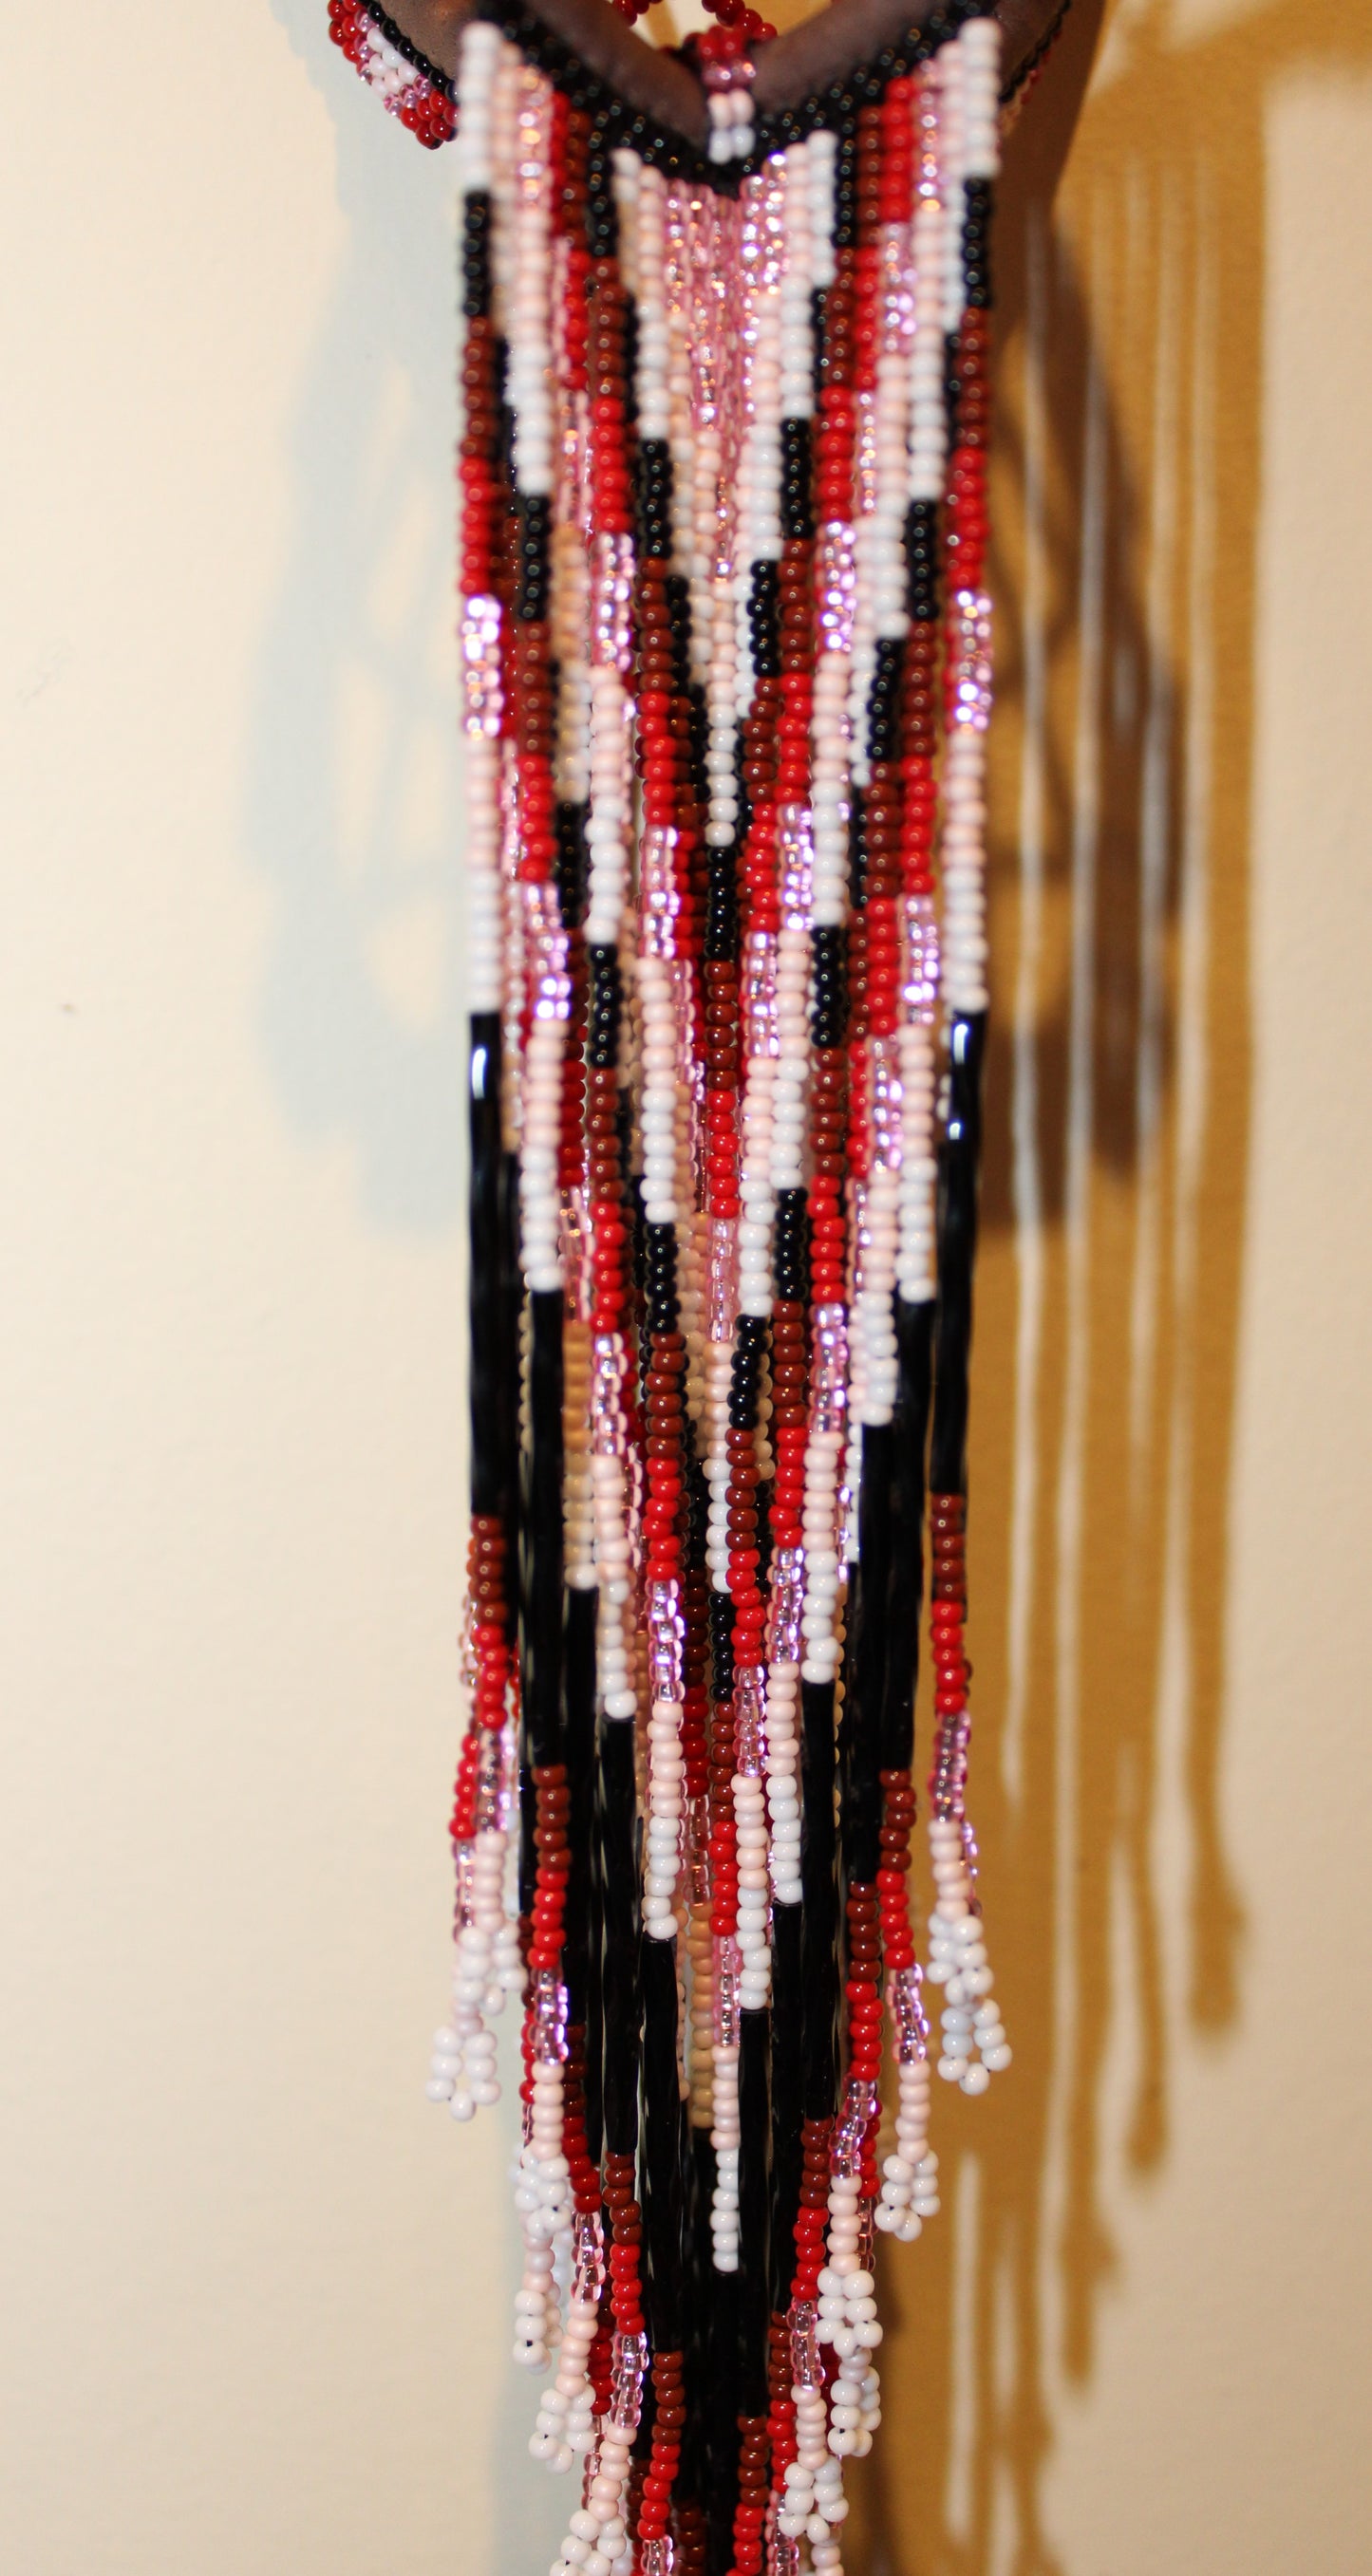 All Relations United - 20 inch 3-Tiered Red/Black/Pink/White Beaded Dreamcatcher